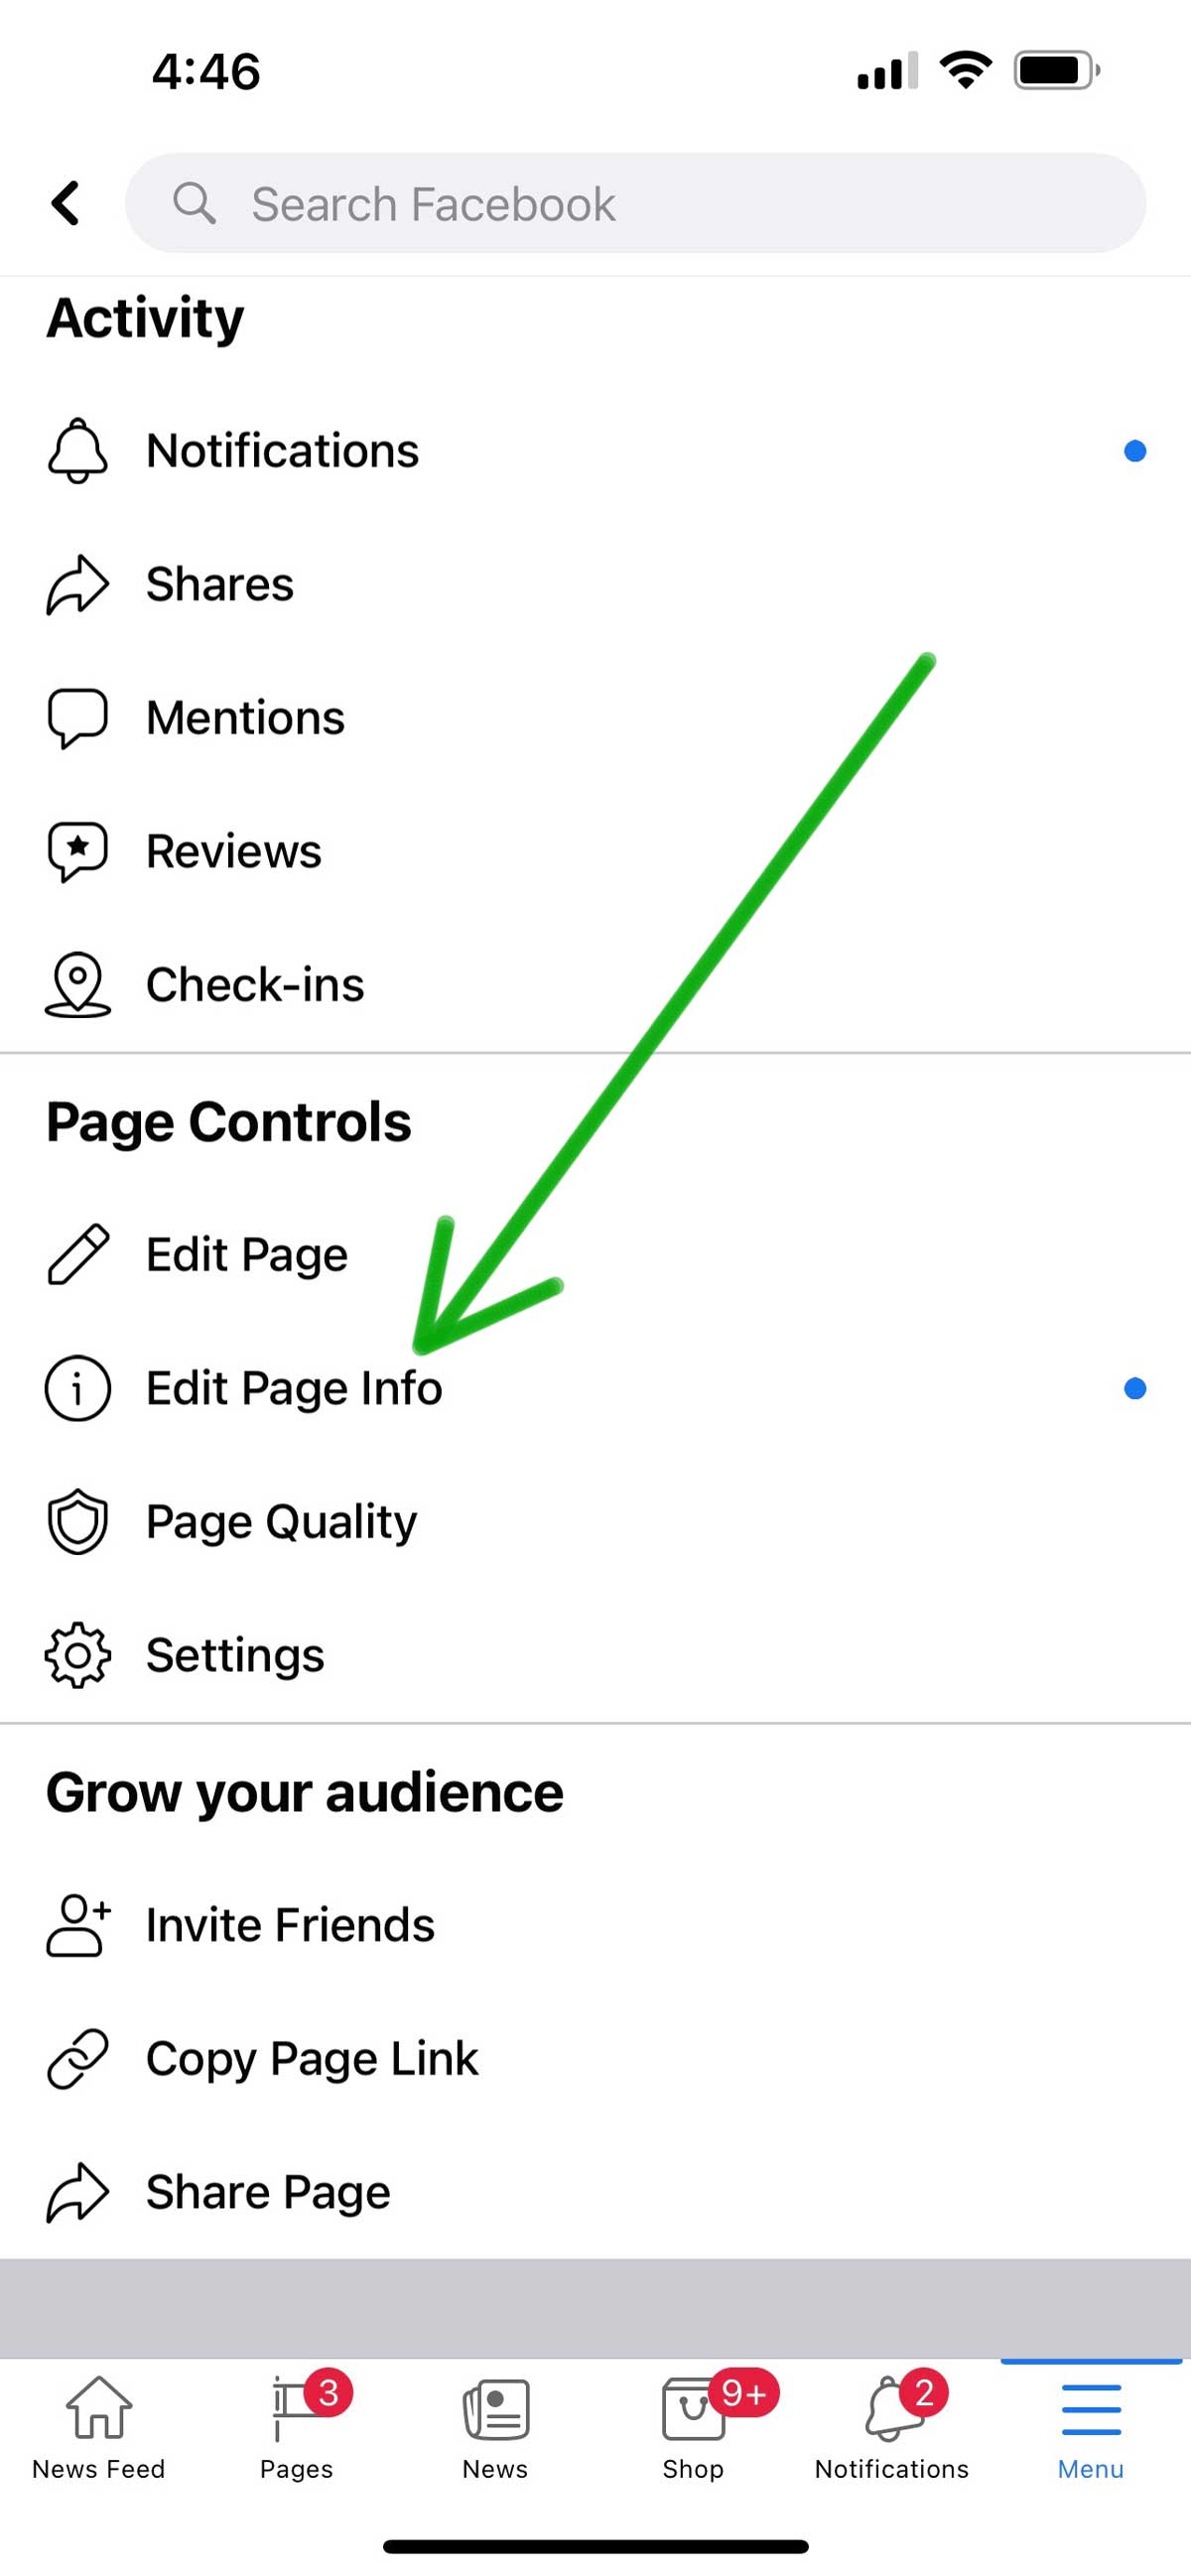 shows the Page Controls section and Edit Page Info.